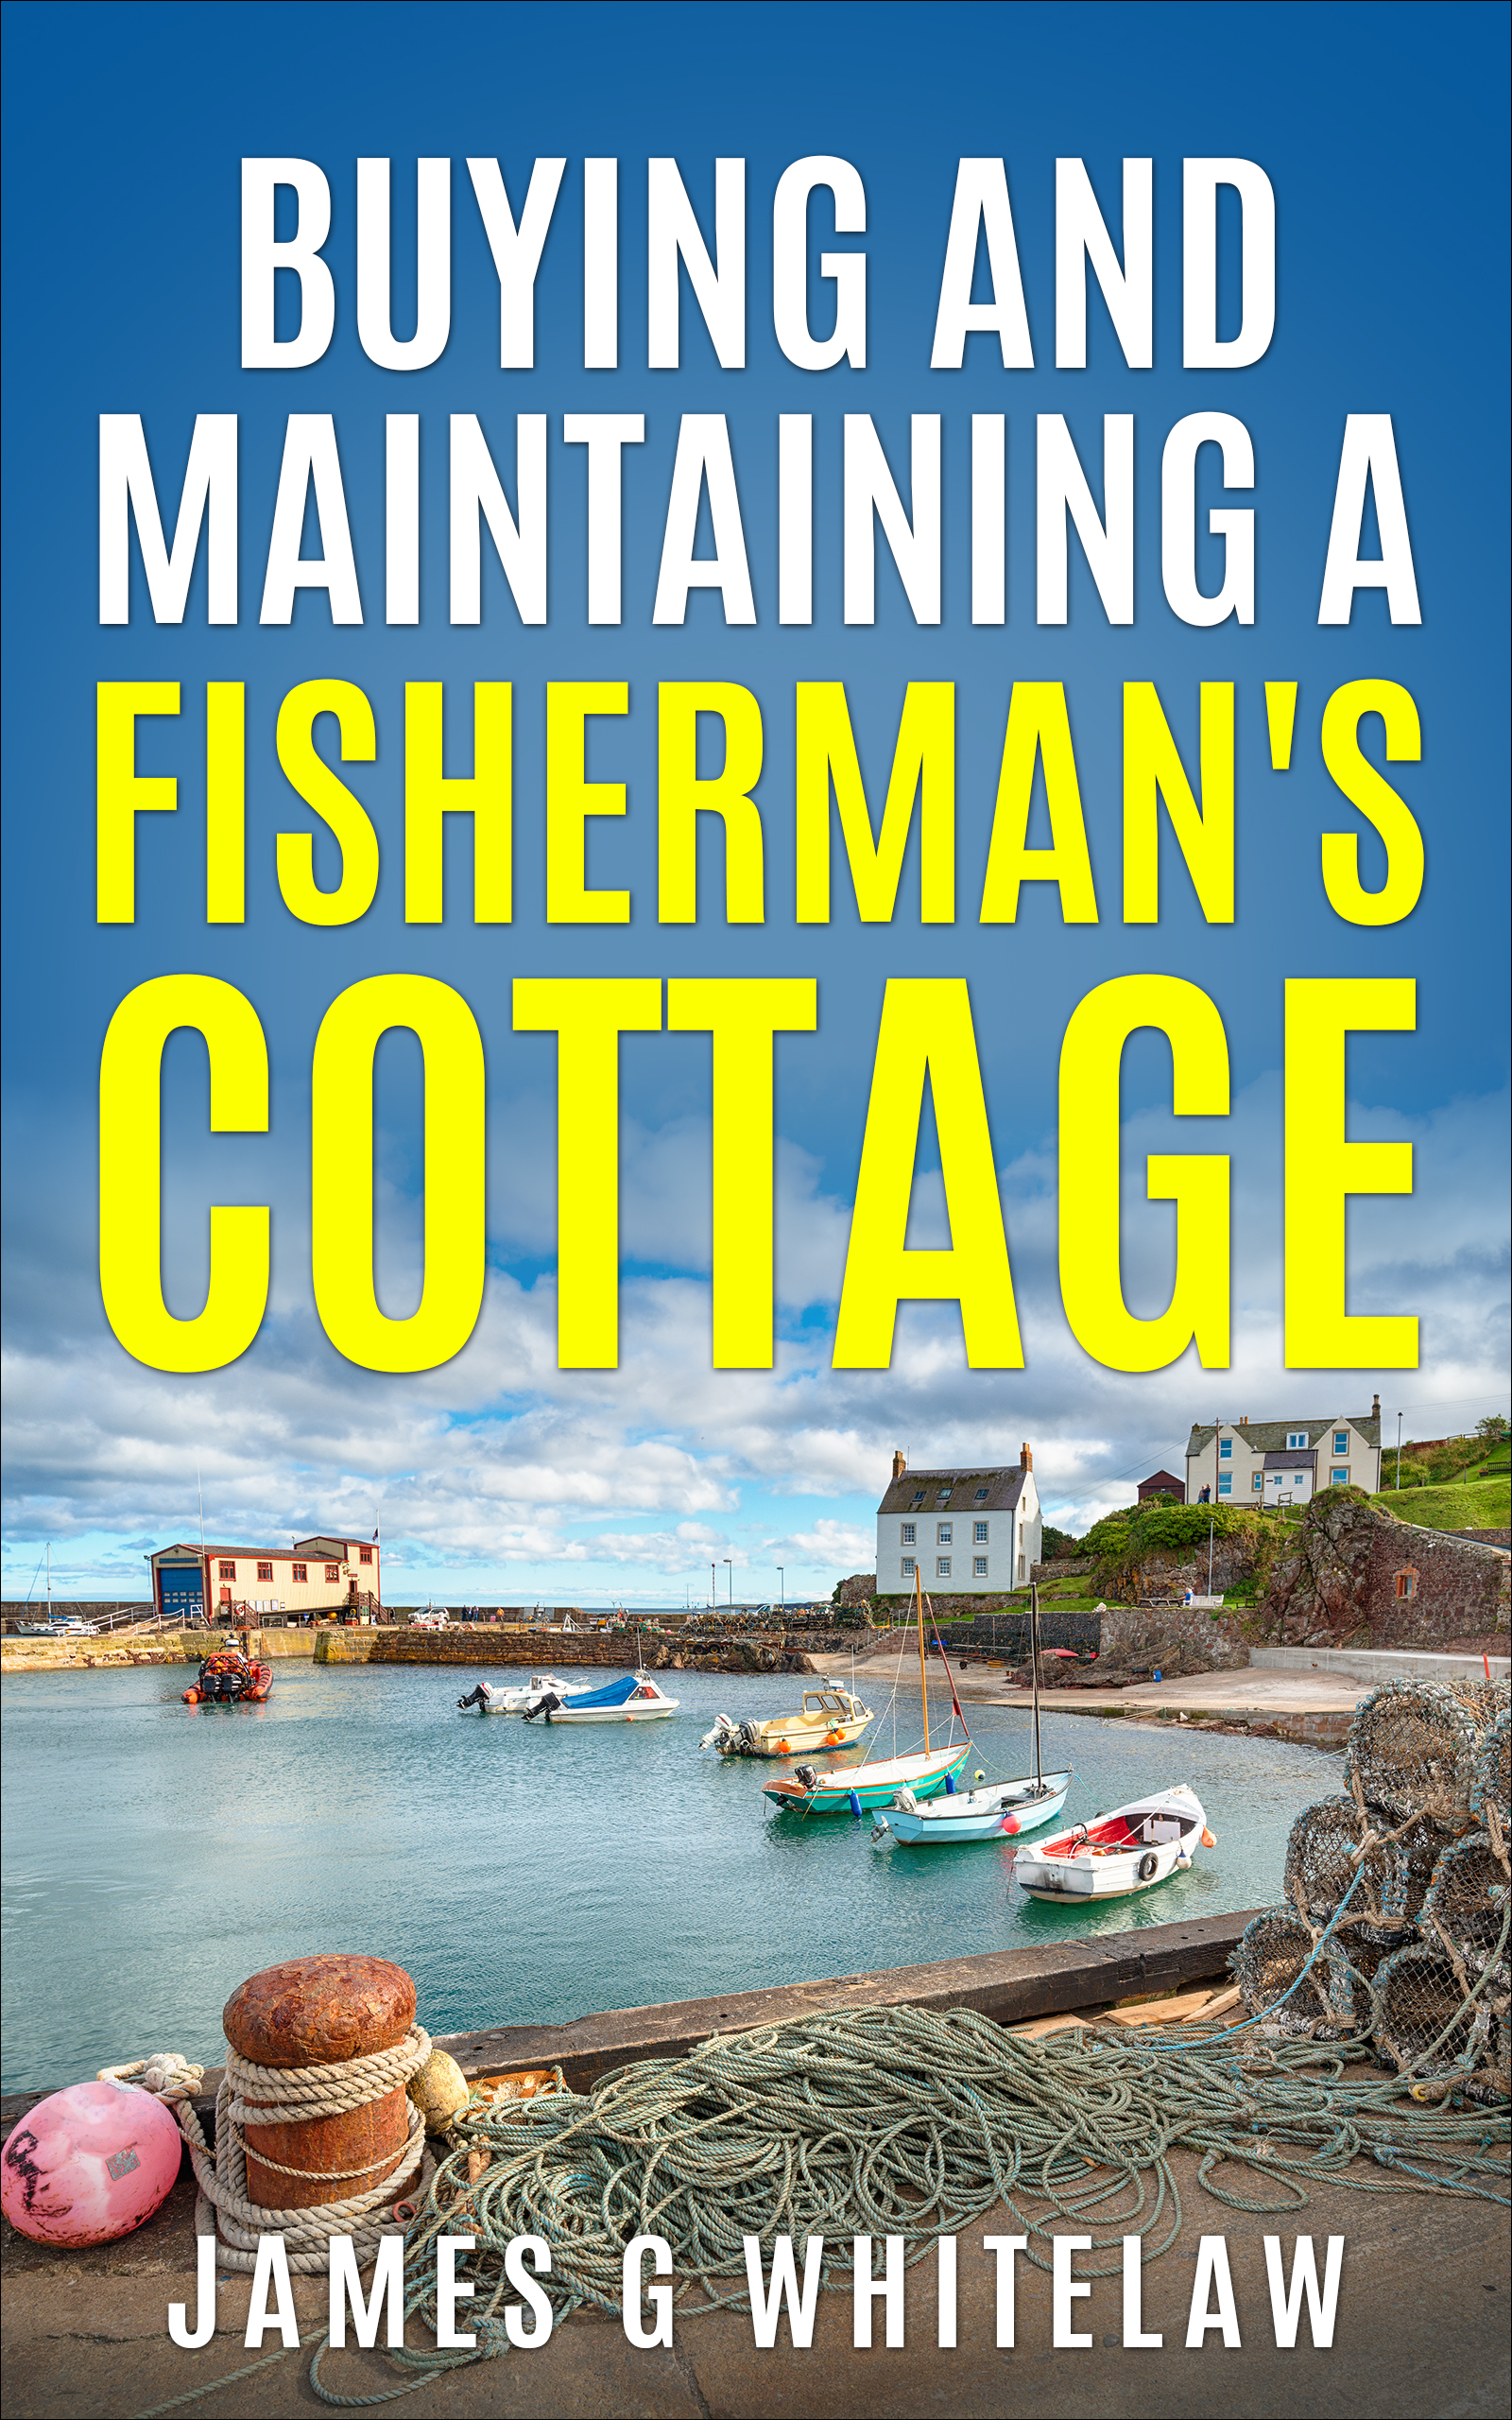 Buying and Maintaining a Fishermans Cottage?